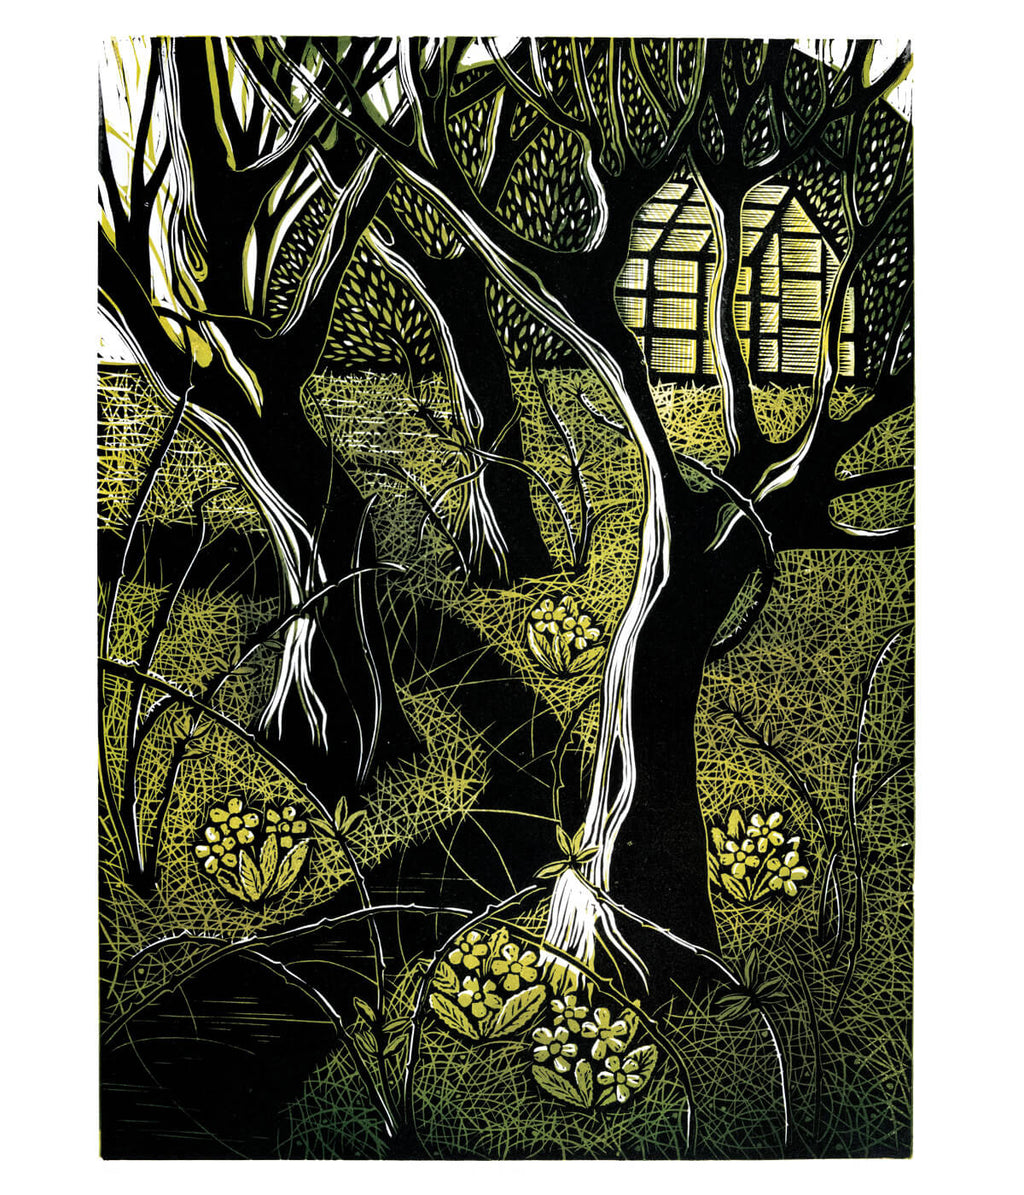 The Badgers Path, a linocut print by Sarah Kirby